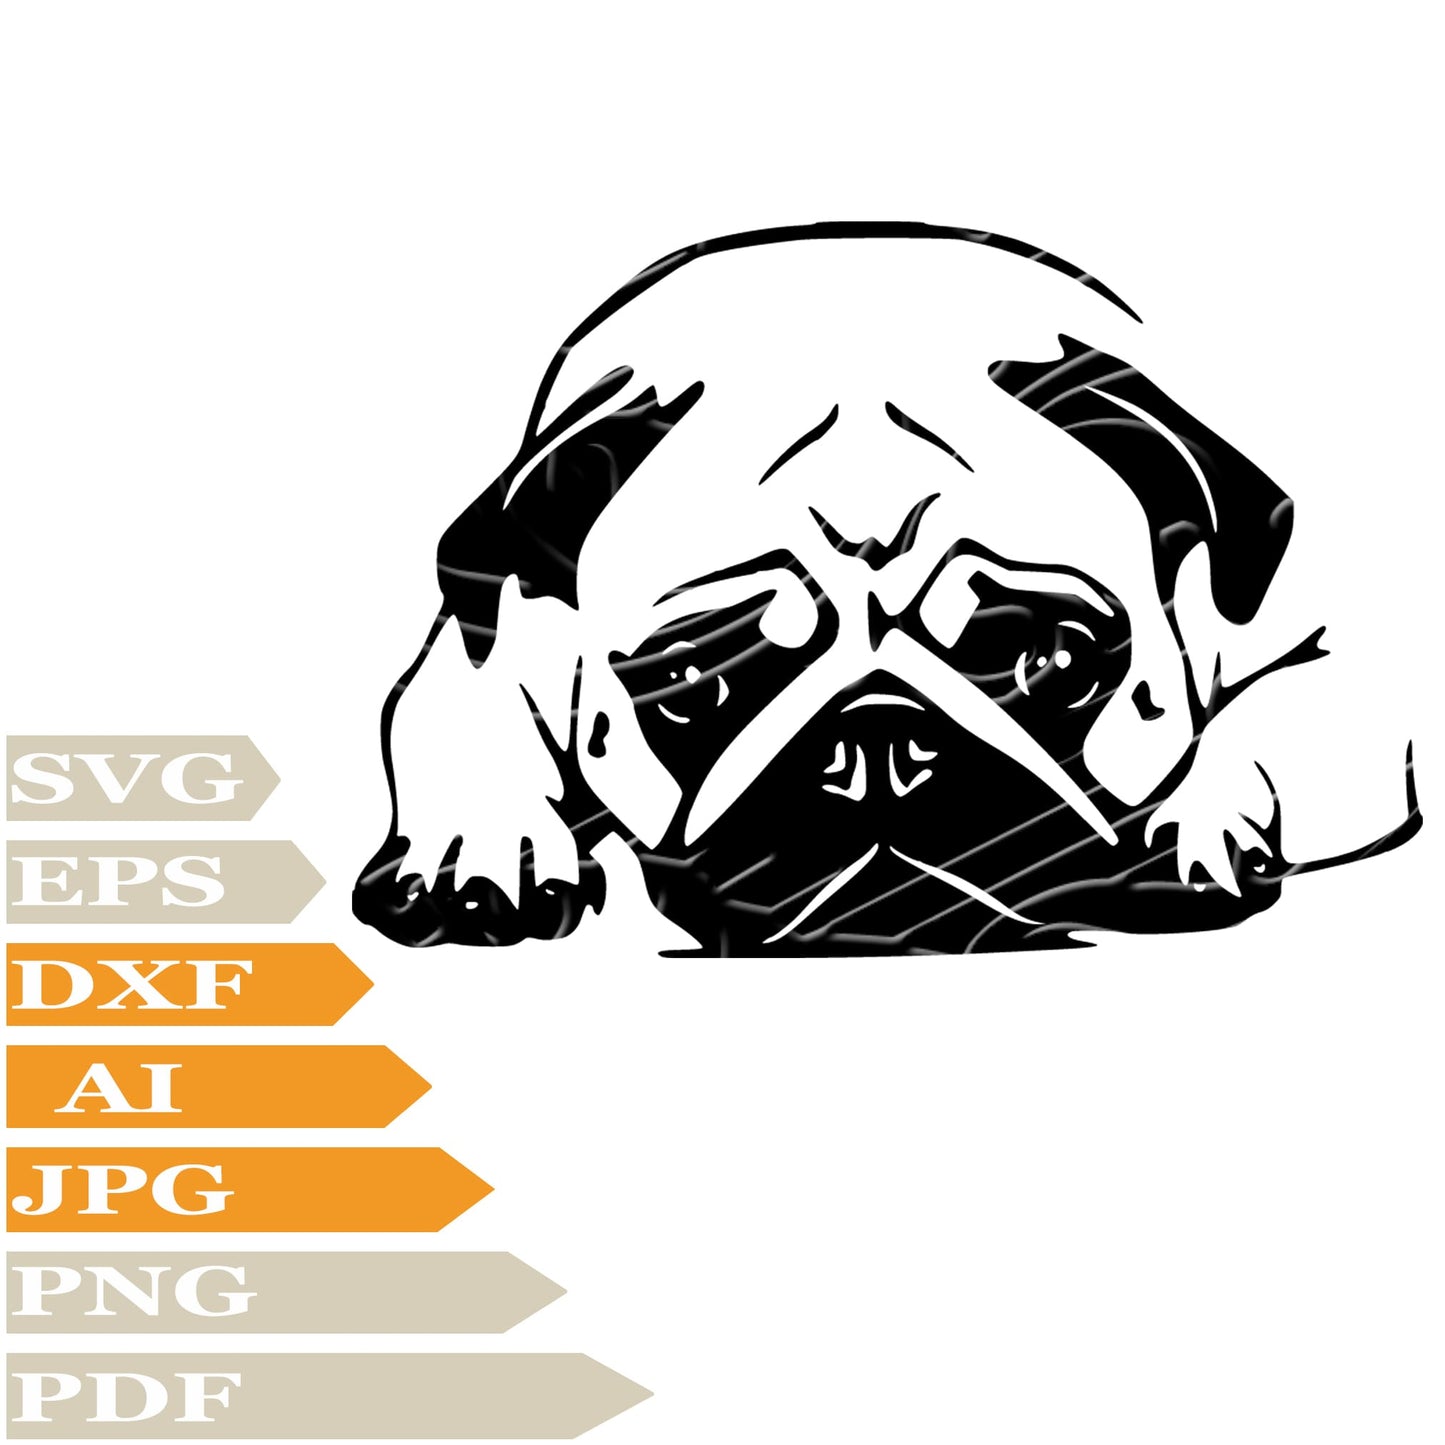 Pug, Funny Pug Dog Svg File, Image Cut, Png, For Tattoo, Silhouette, Digital Vector Download, Cut File, Clipart, For Cricut